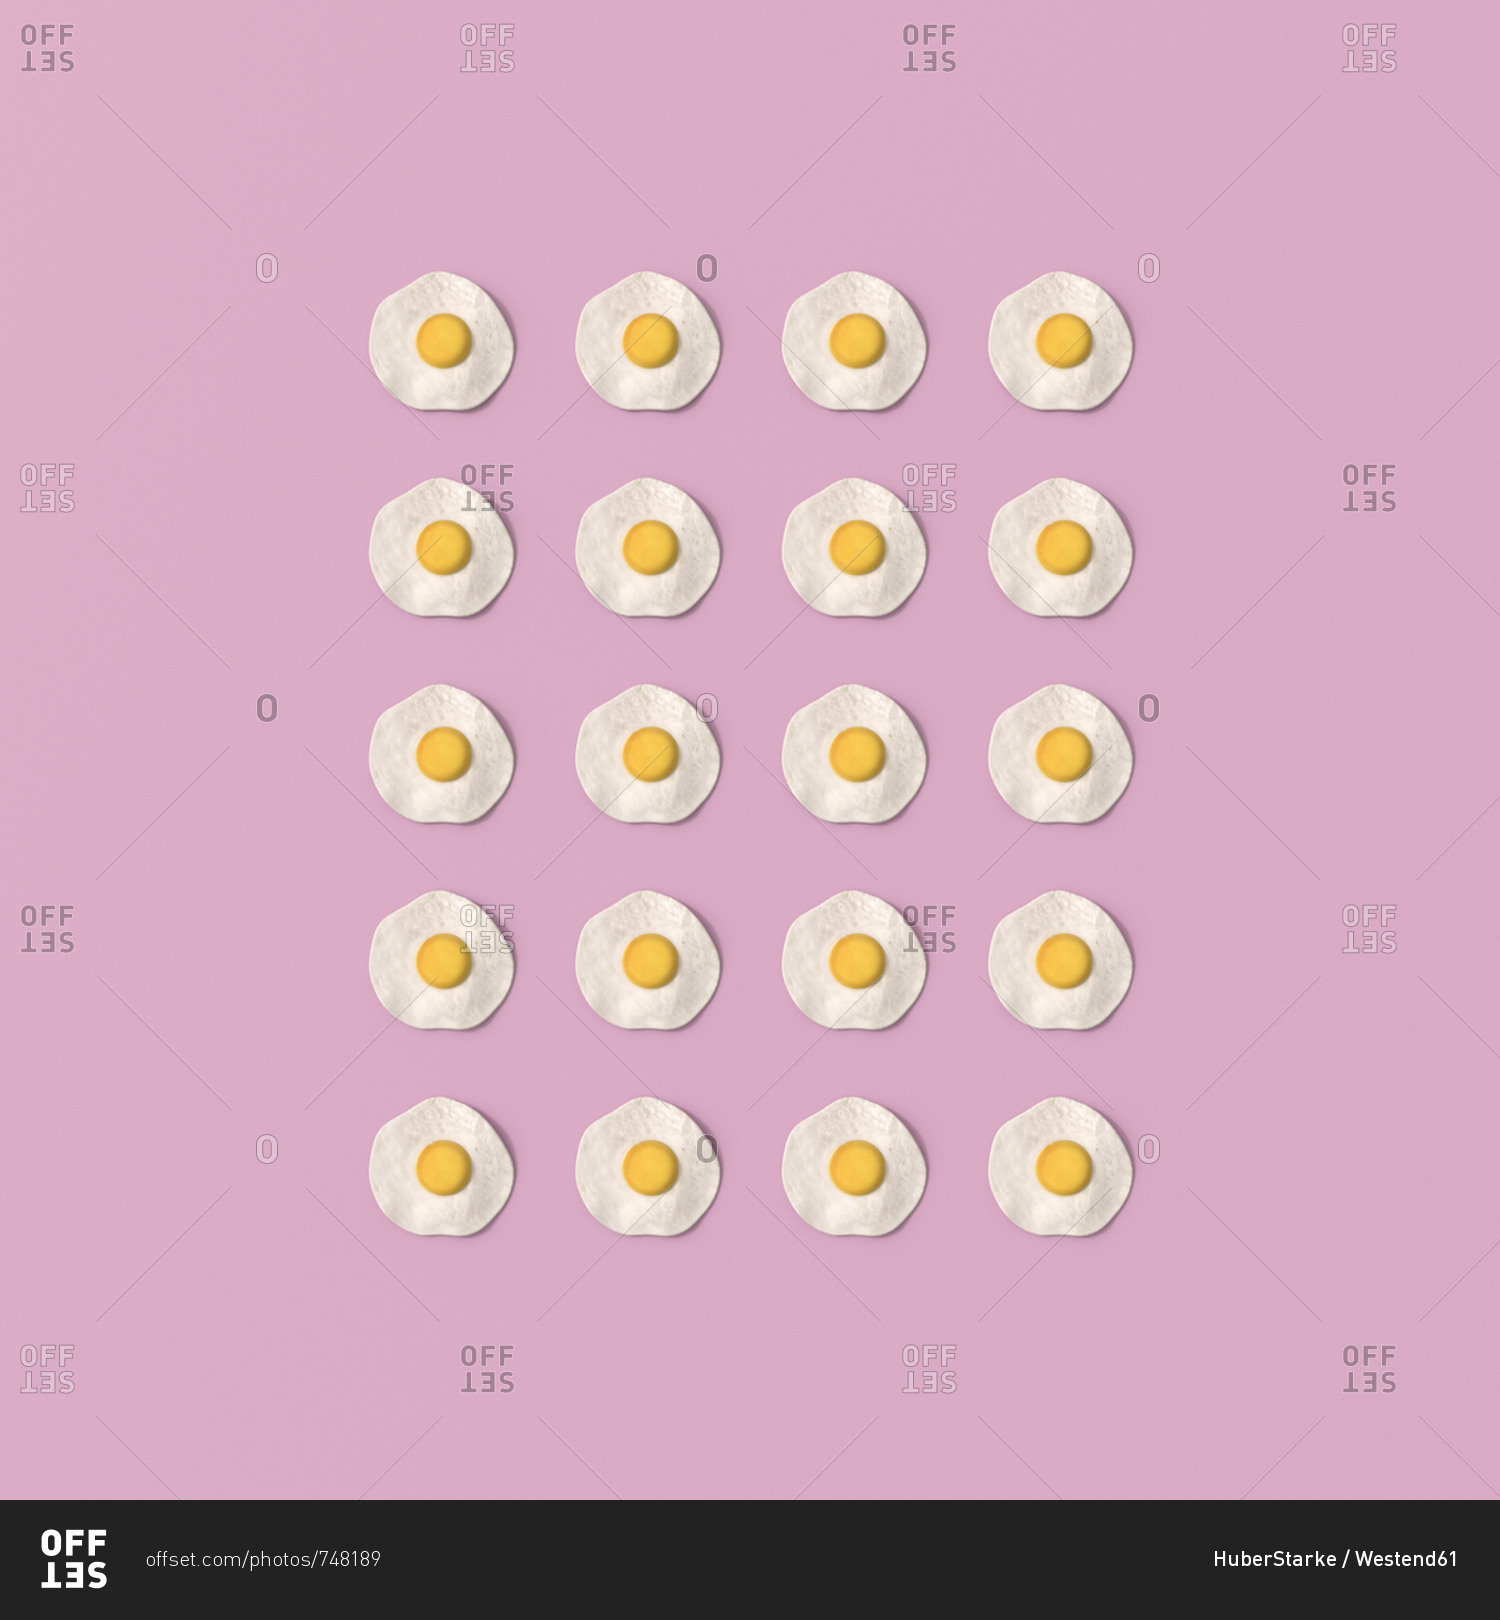 3D rendering- Rows of fried eggs on pink background